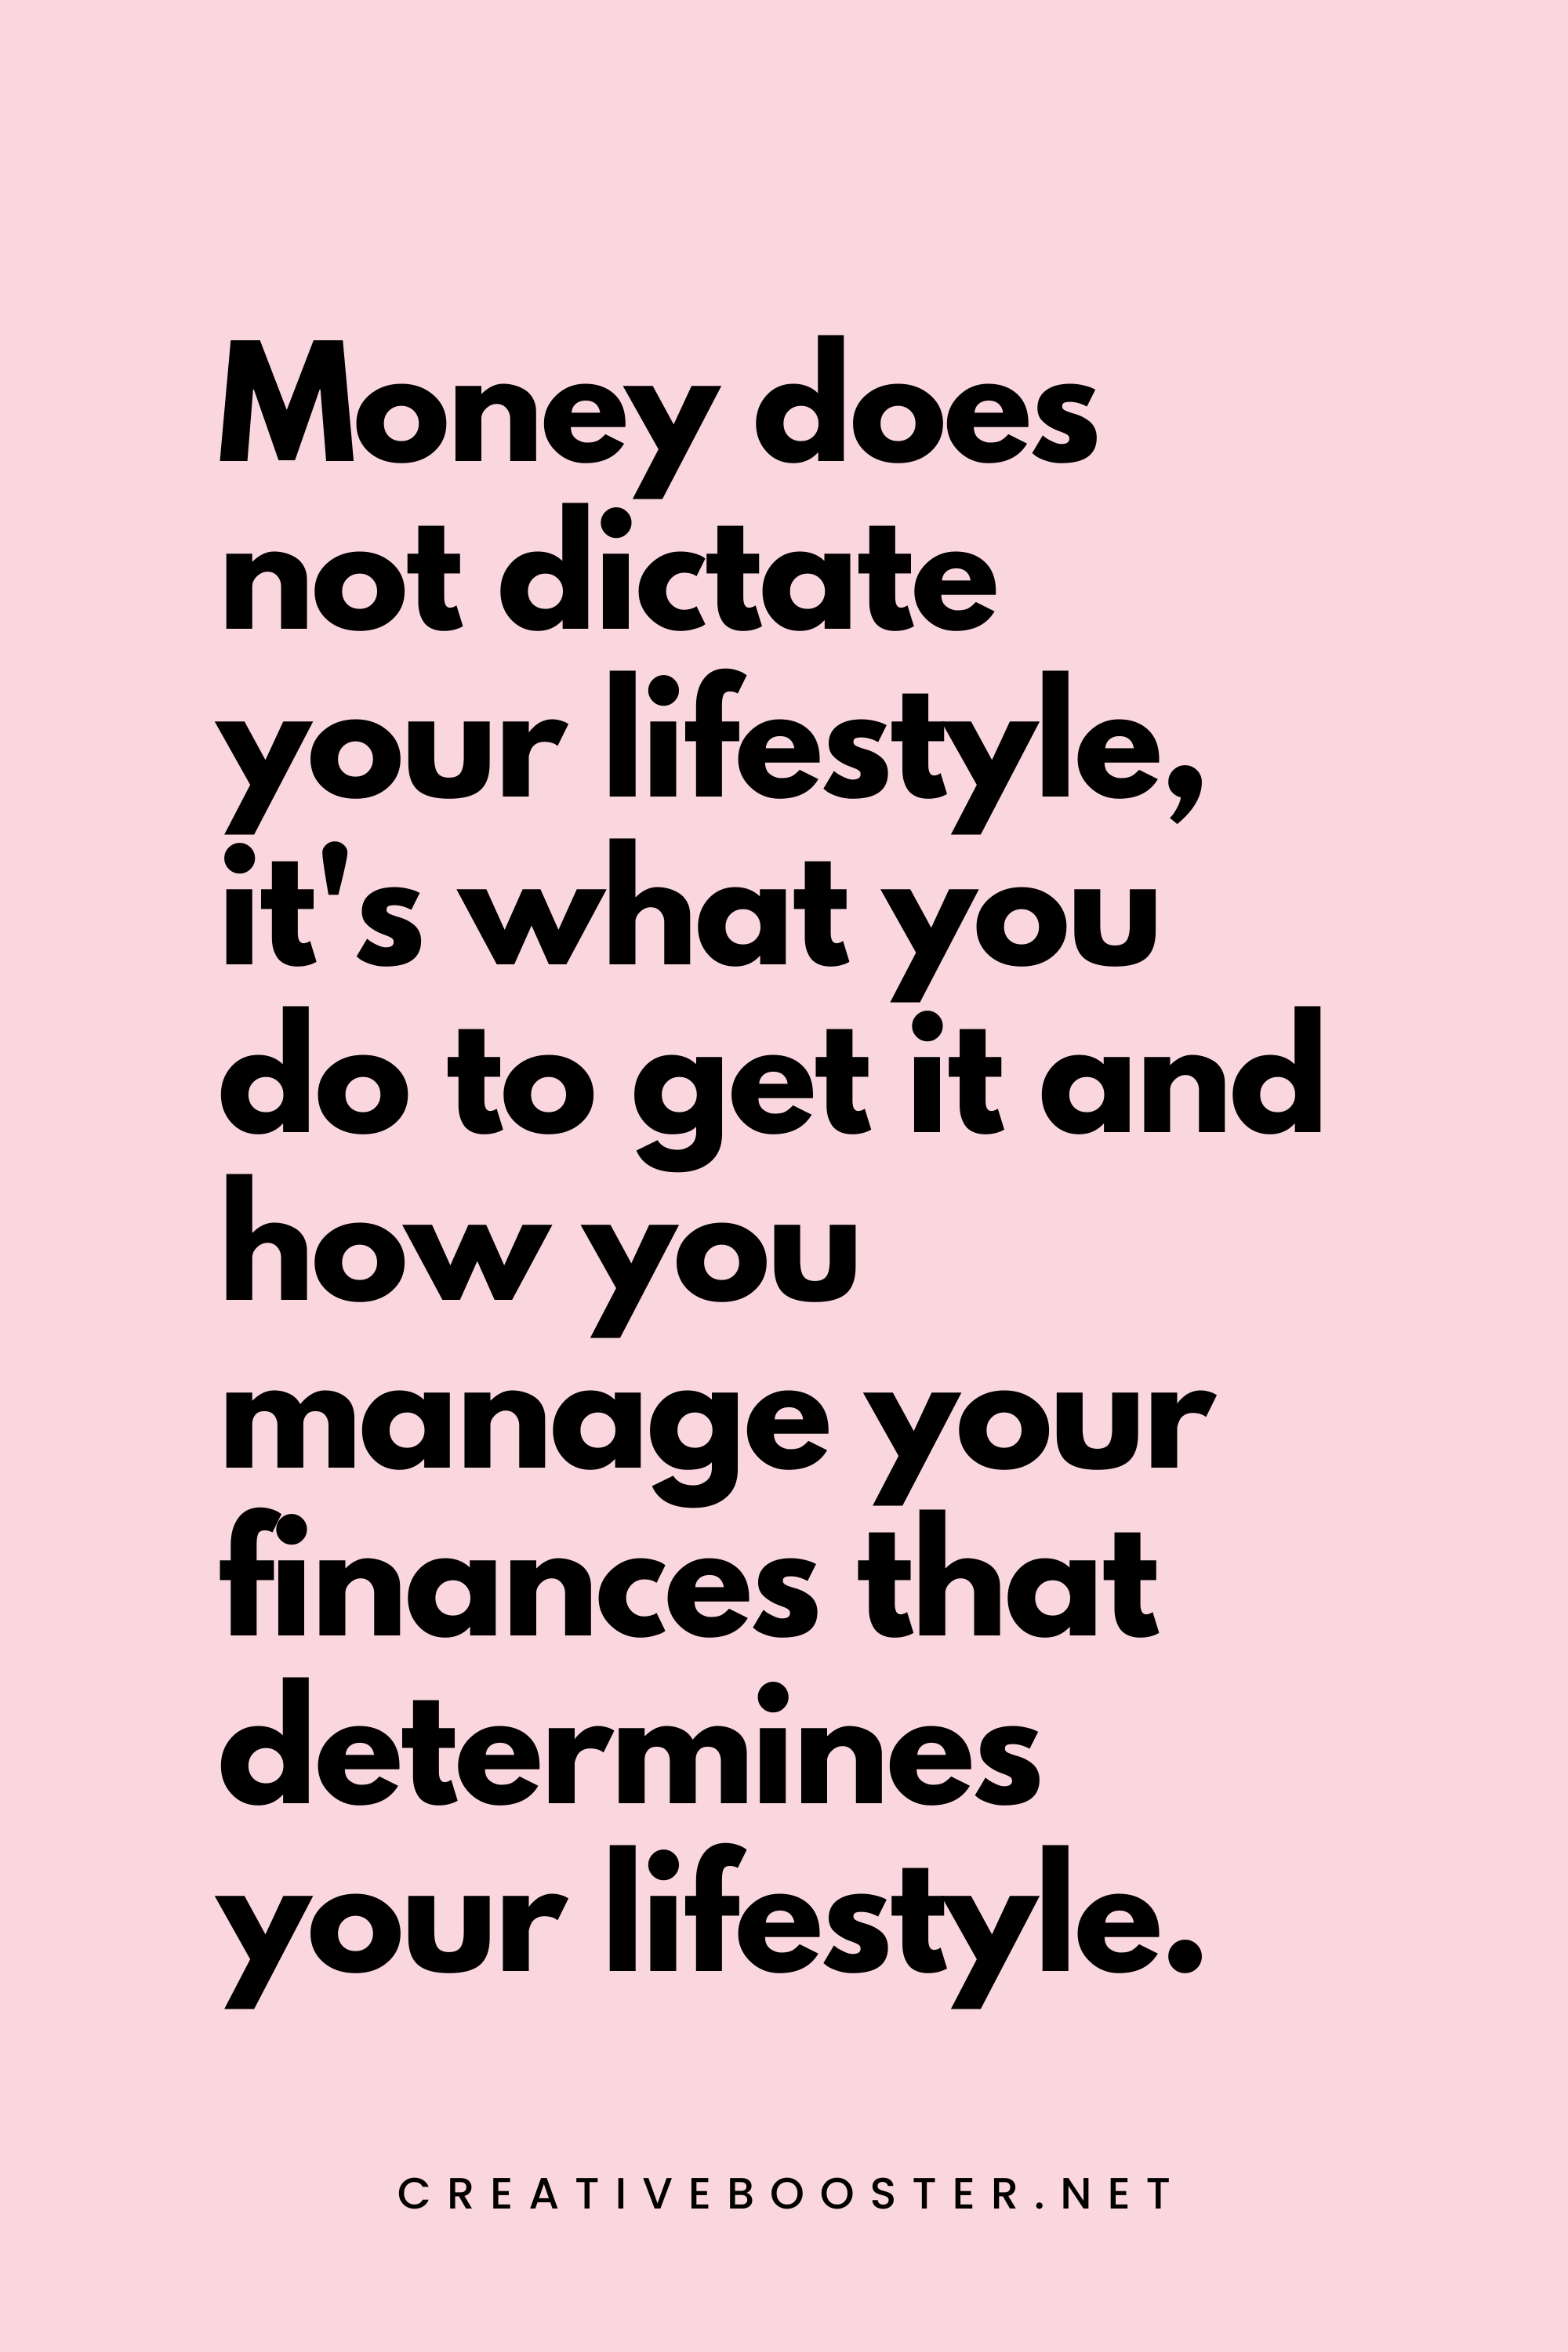 39. Money does not dictate your lifestyle, it's what you do to get it and how you manage your finances that determines your lifestyle. - Wayne Chirisa - 4. Financial Freedom Quotes for Women